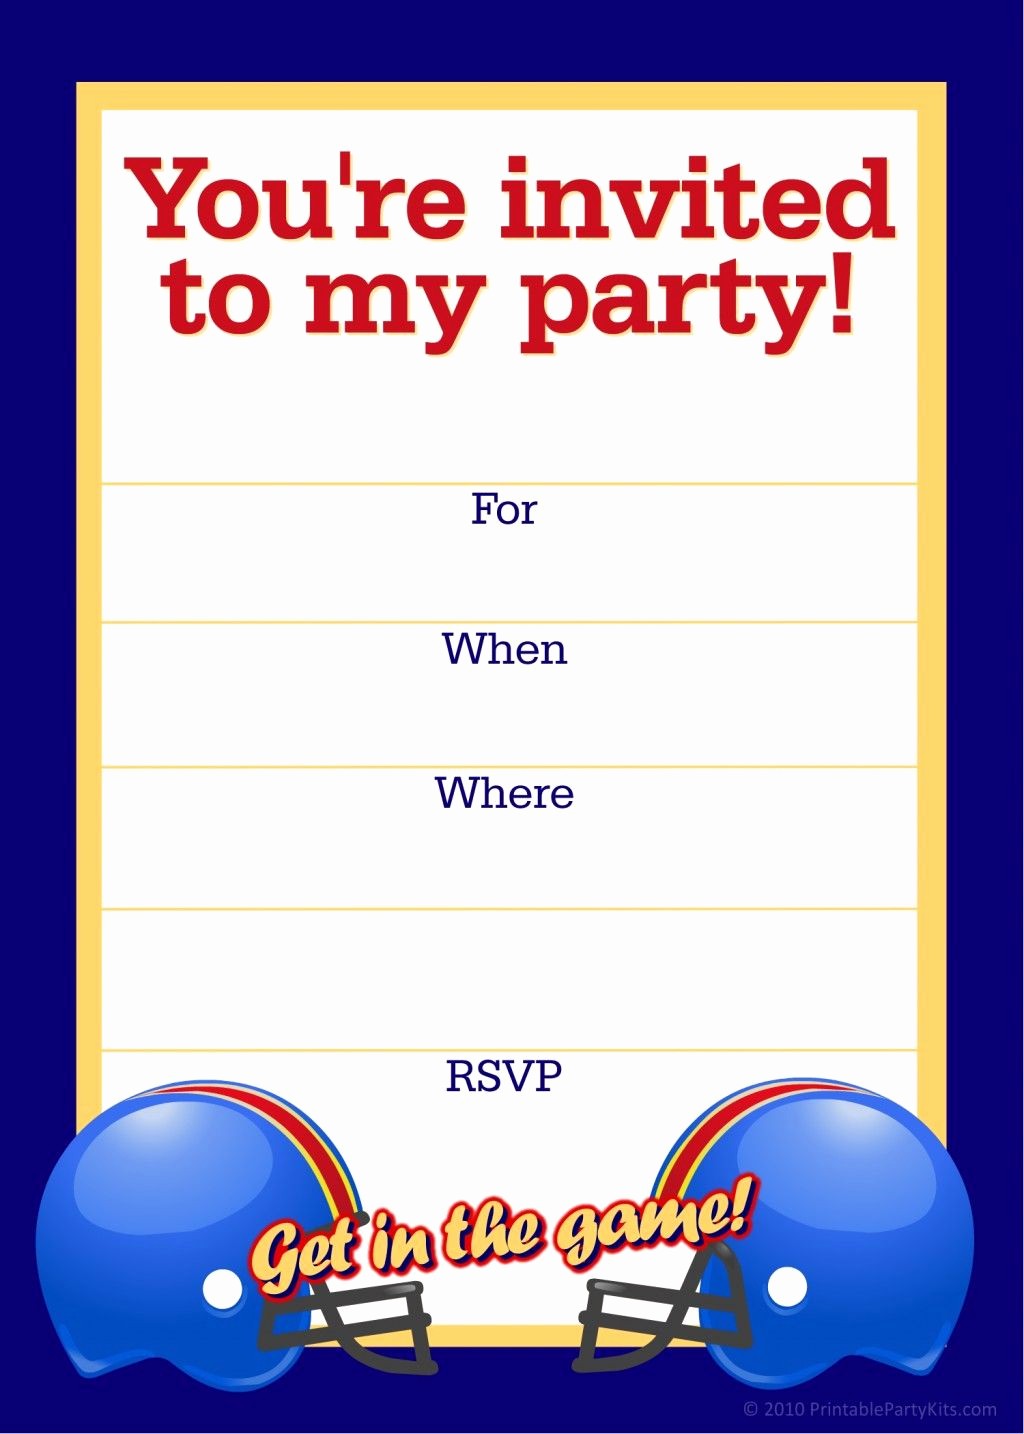 Free Printable Party Invitations Templates New Free Printable Sports Birthday Party Invitations Templates